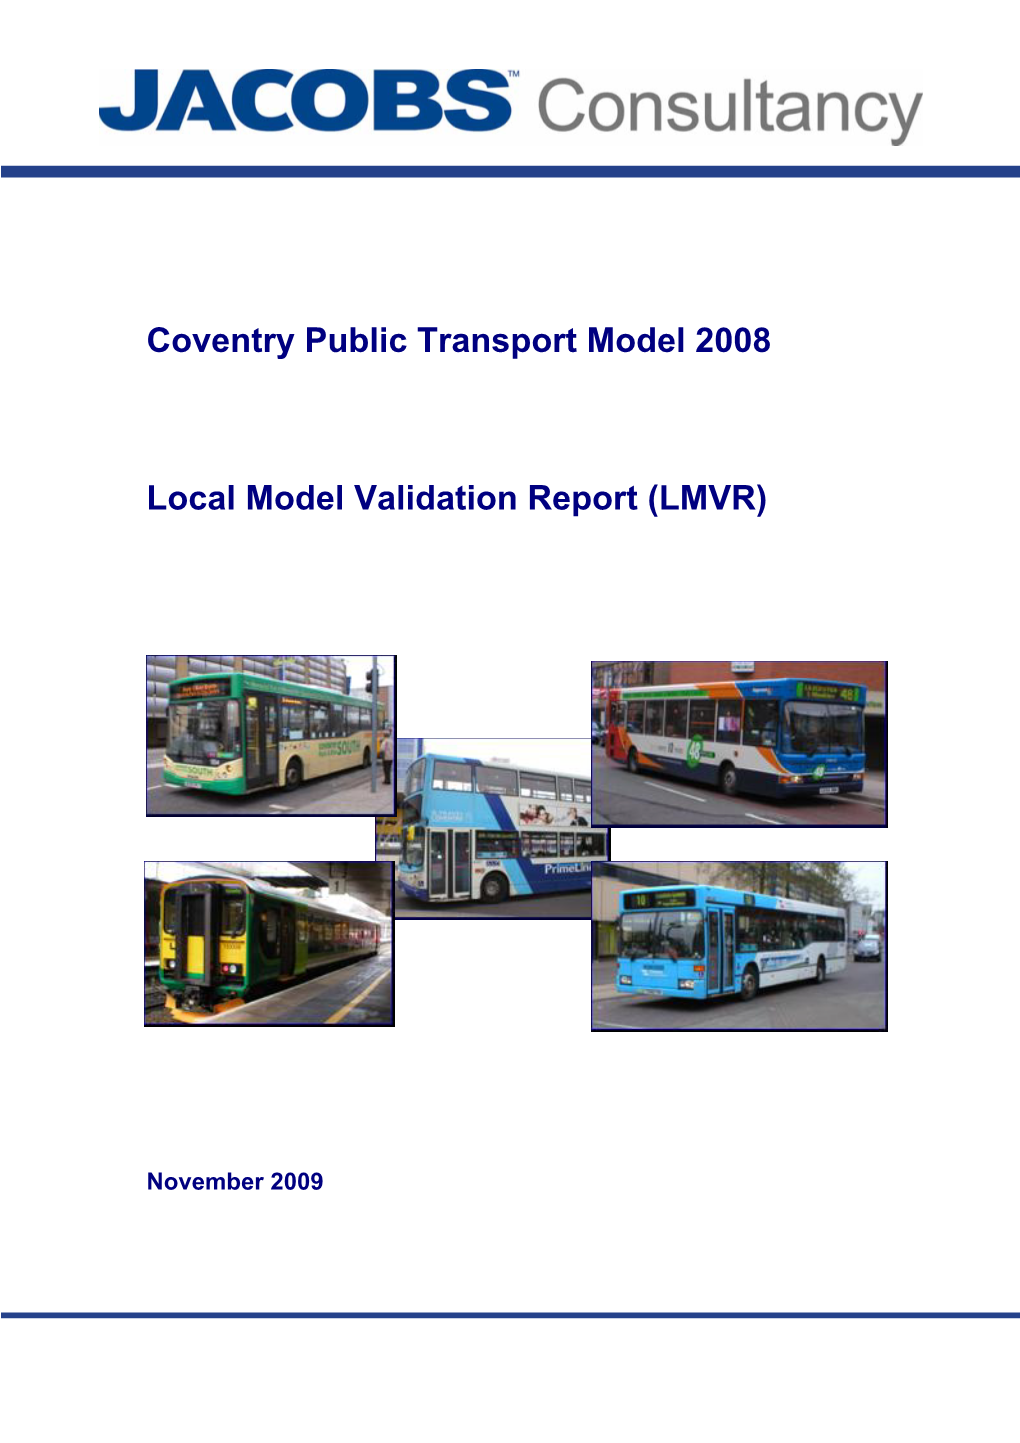 Coventry Public Transport Model 2008 Local Model Validation Report